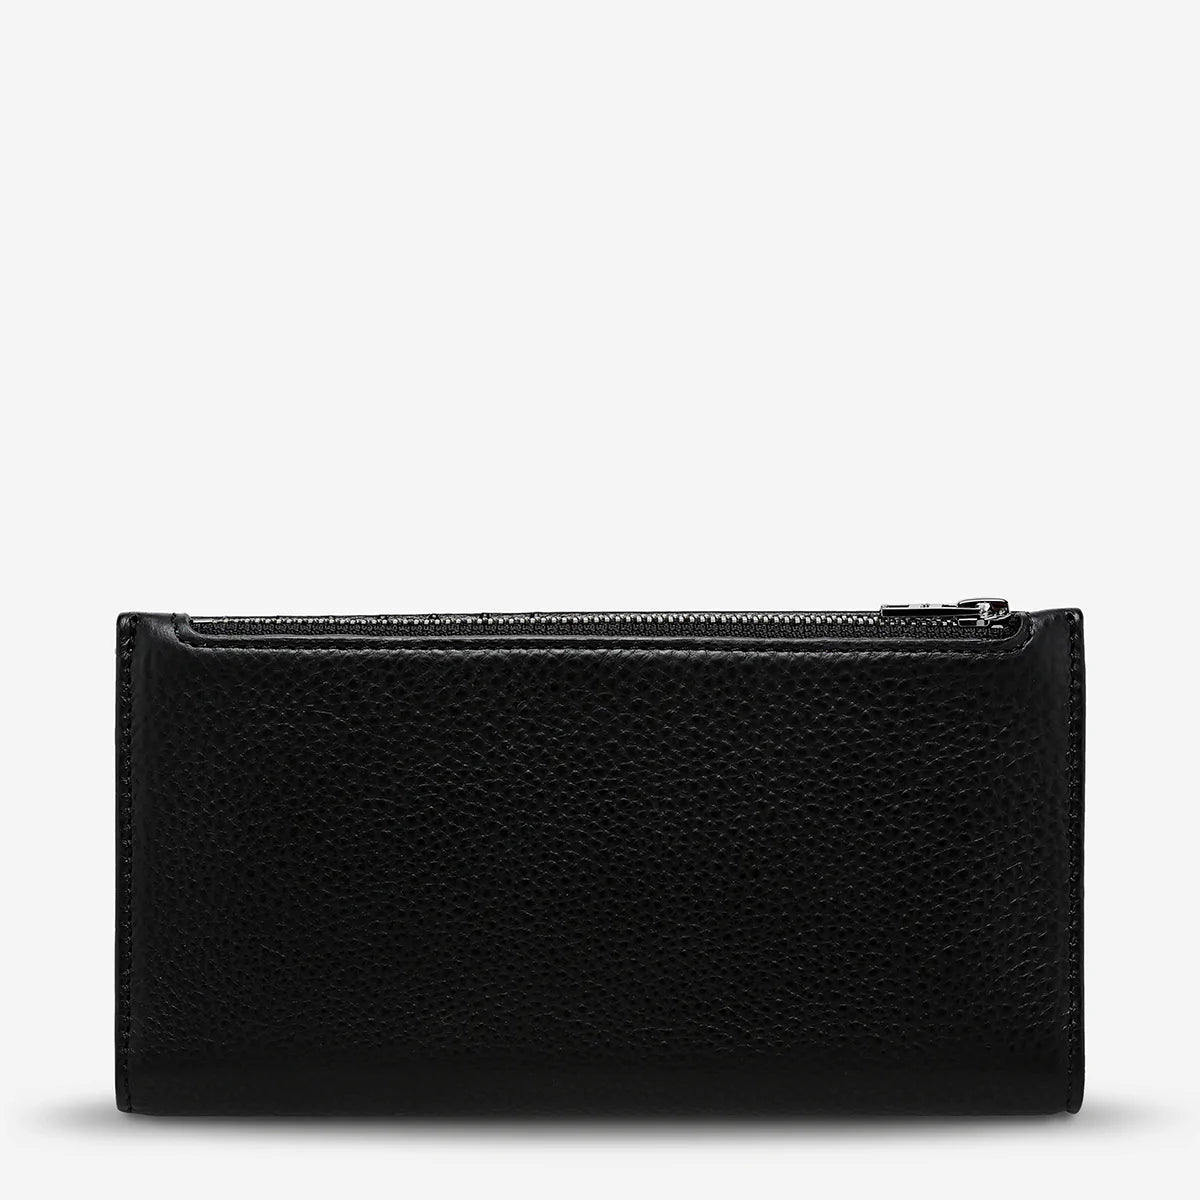 STATUS ANXIETY OLD FLAME WALLET BLACK